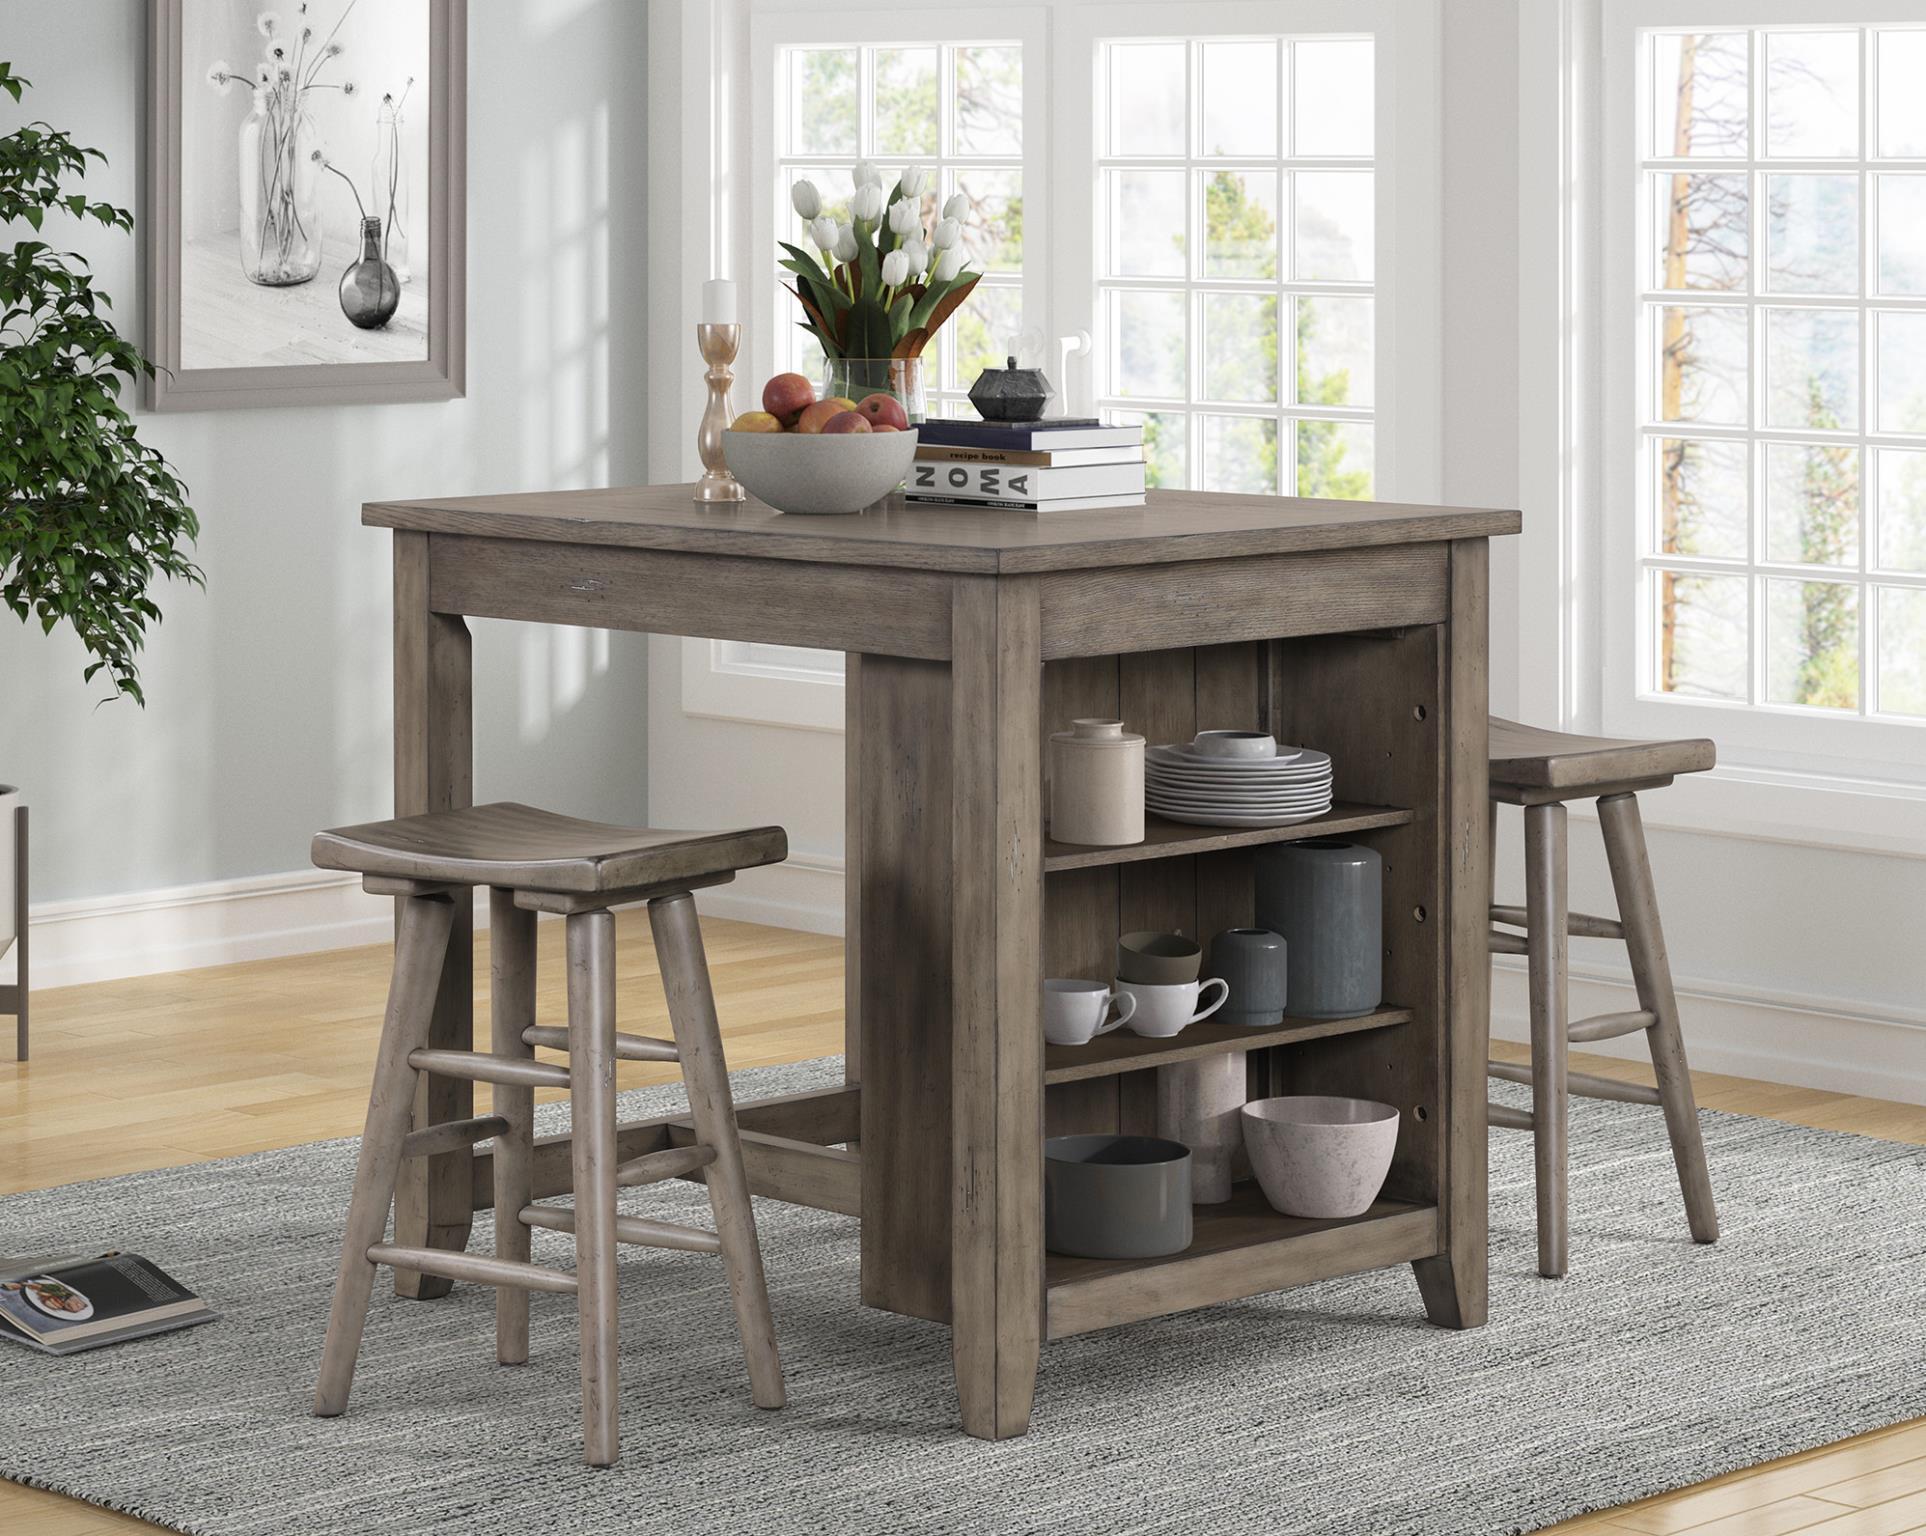 Rustic, Cottage, Farmhouse Counter Dining Table Rustic Counter 1284-530 in Brown 